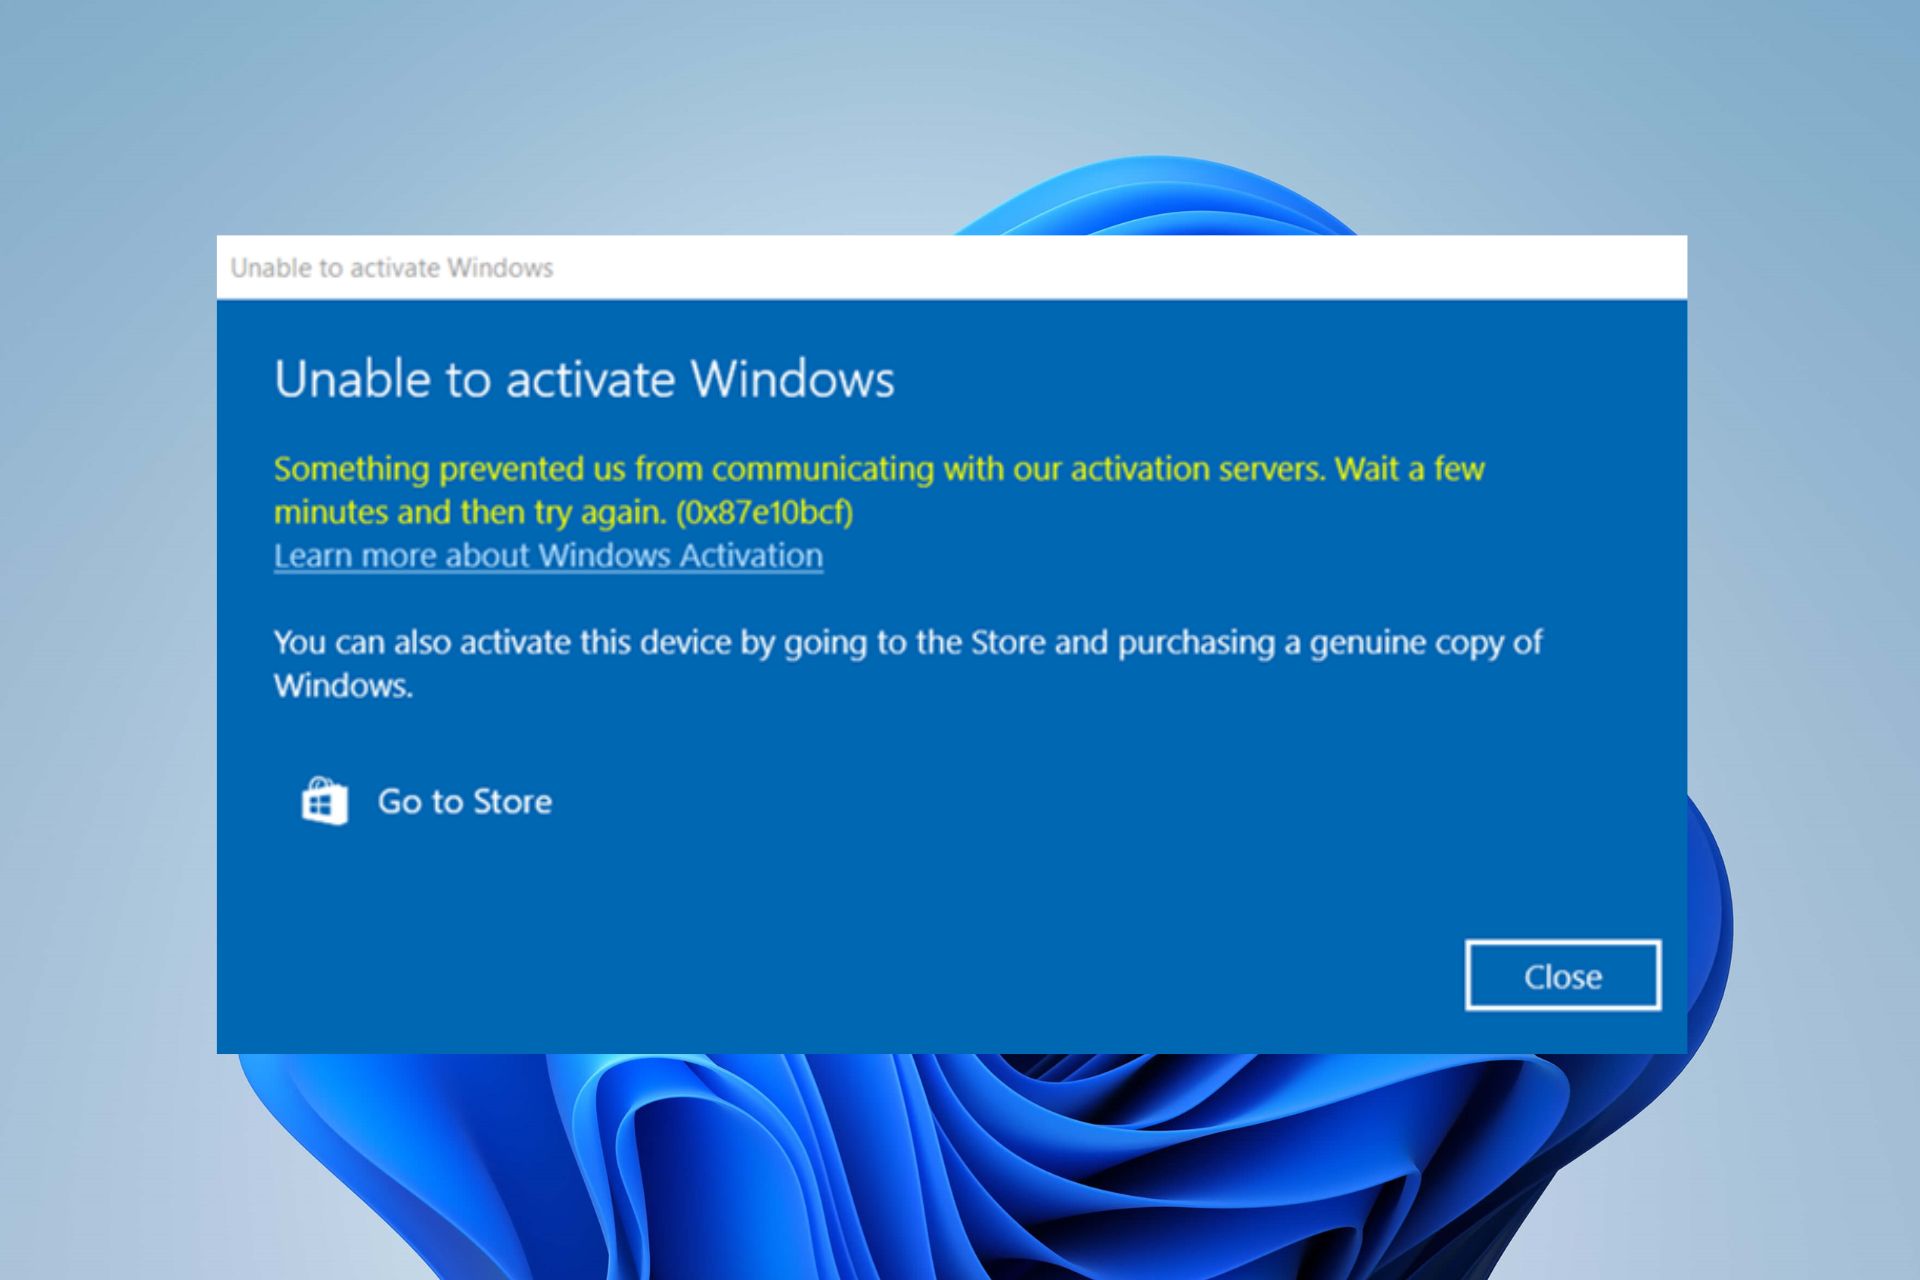 we can't reactivate windows as our servers aren't available right now